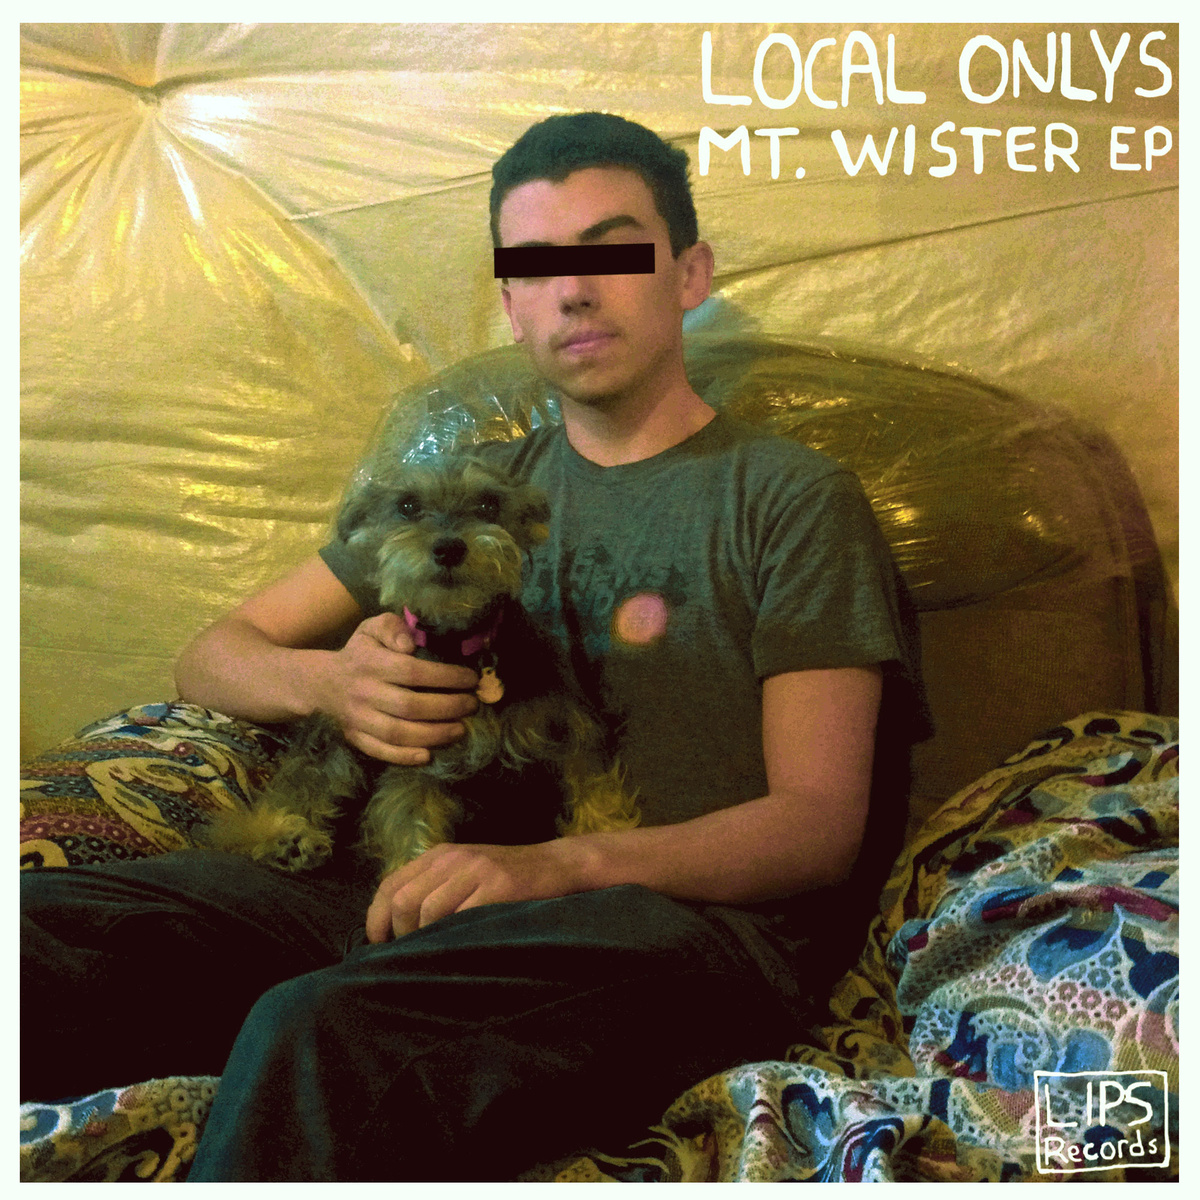 Local Onlys Drop Mt. Wister EP